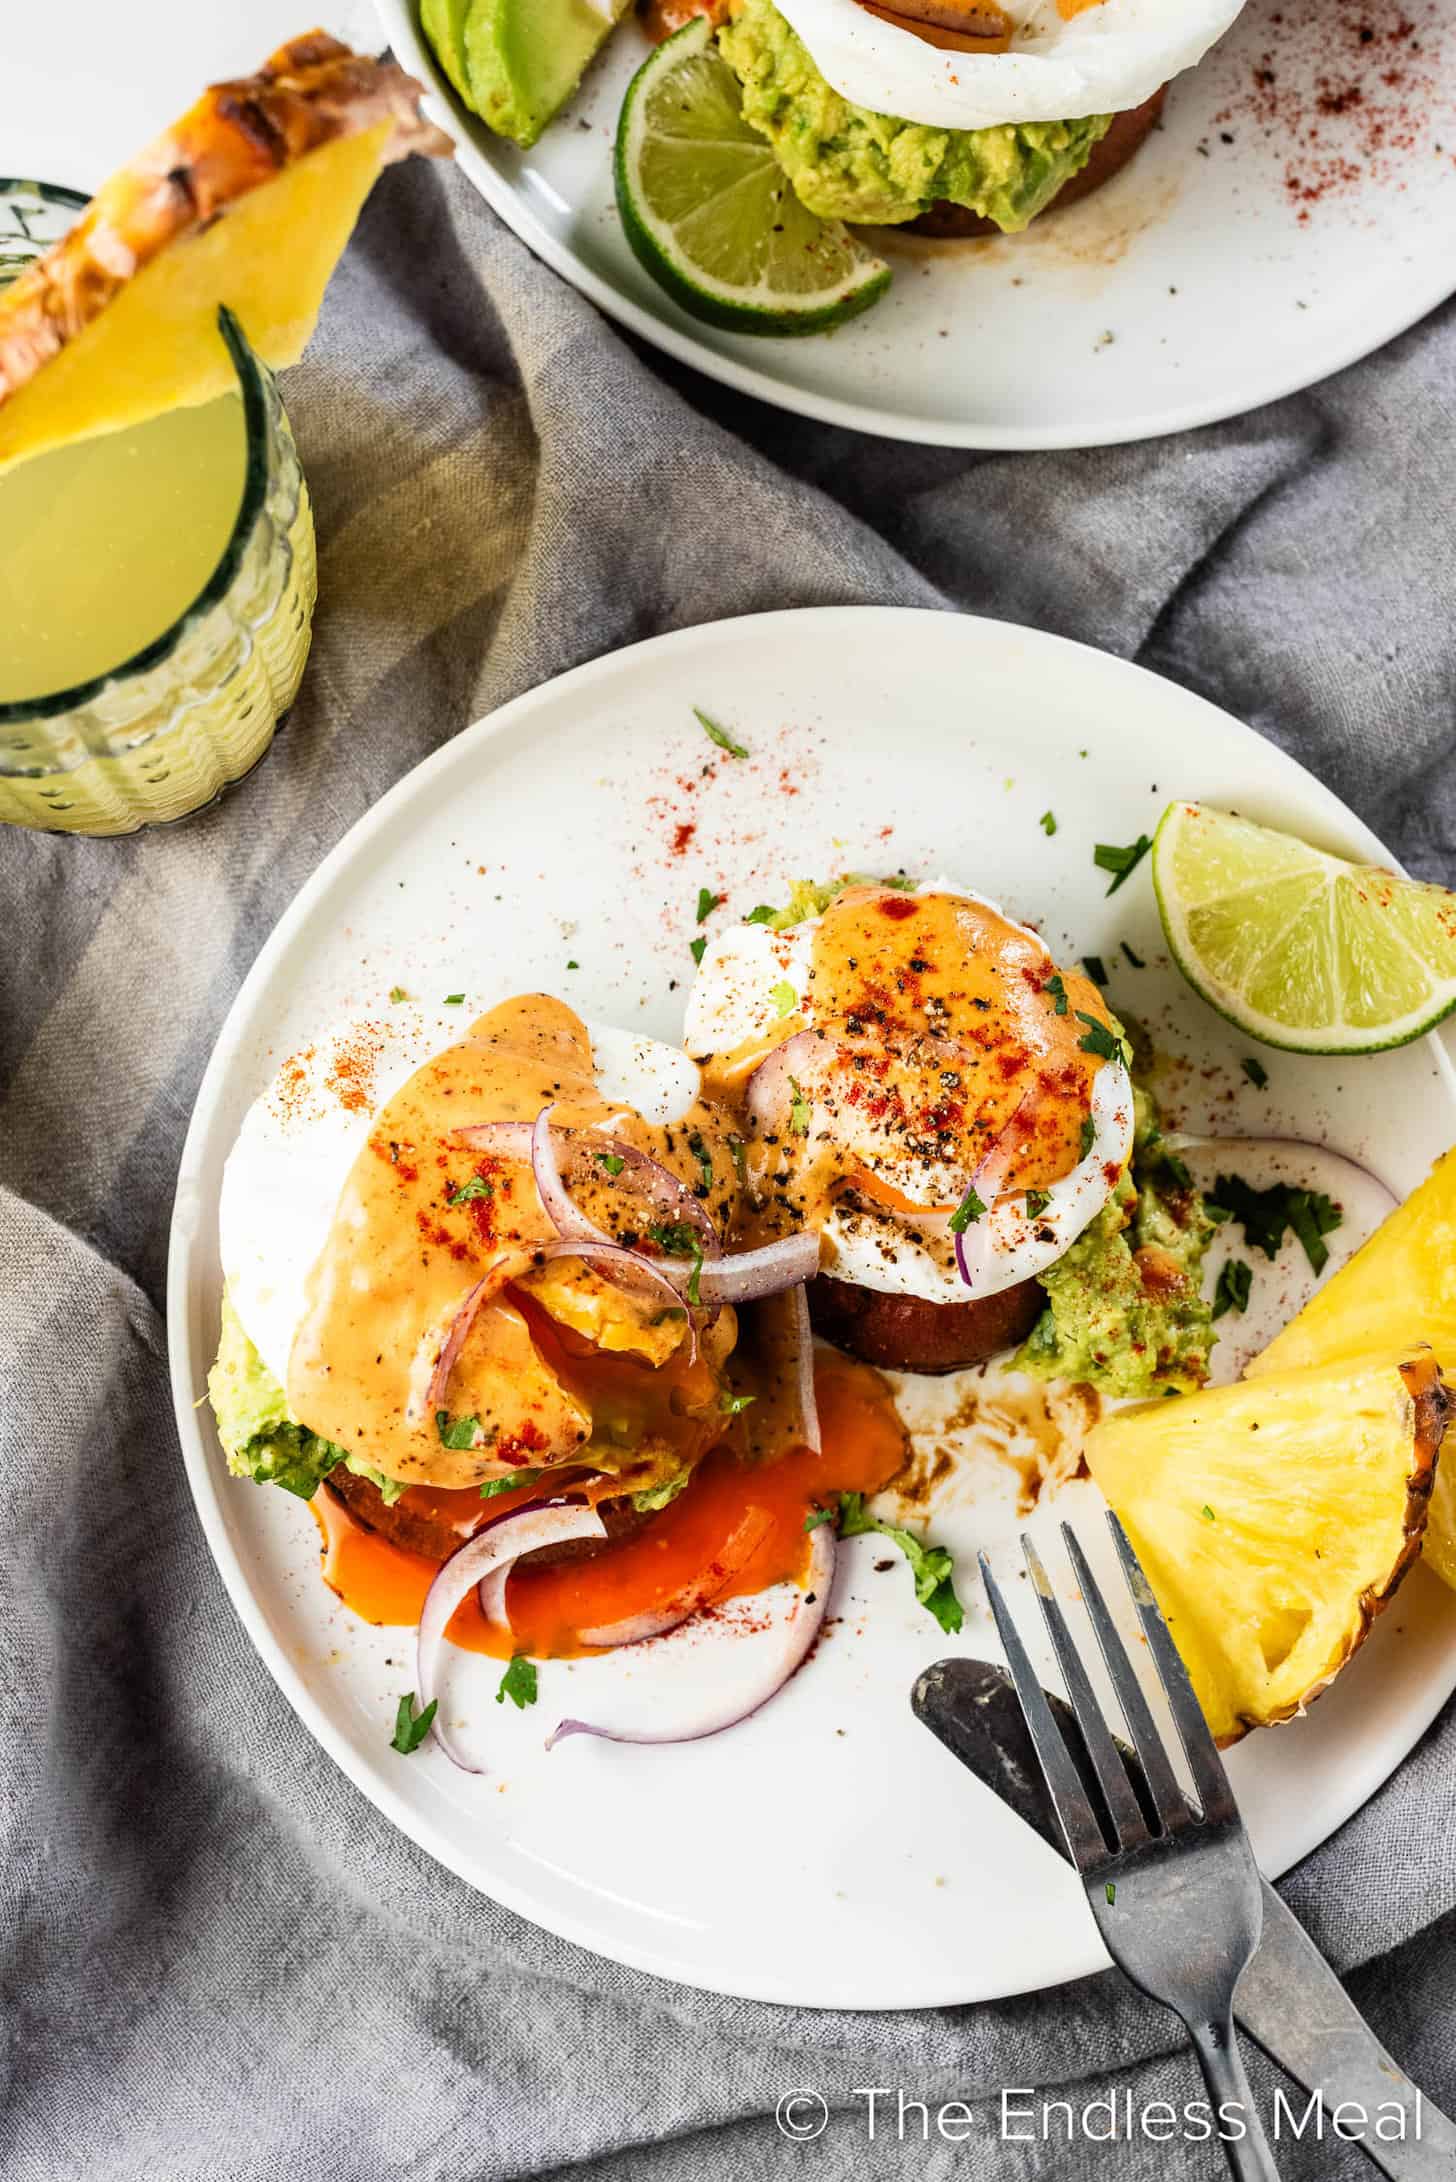 Looking down on a plate of Mexican Eggs Benedict